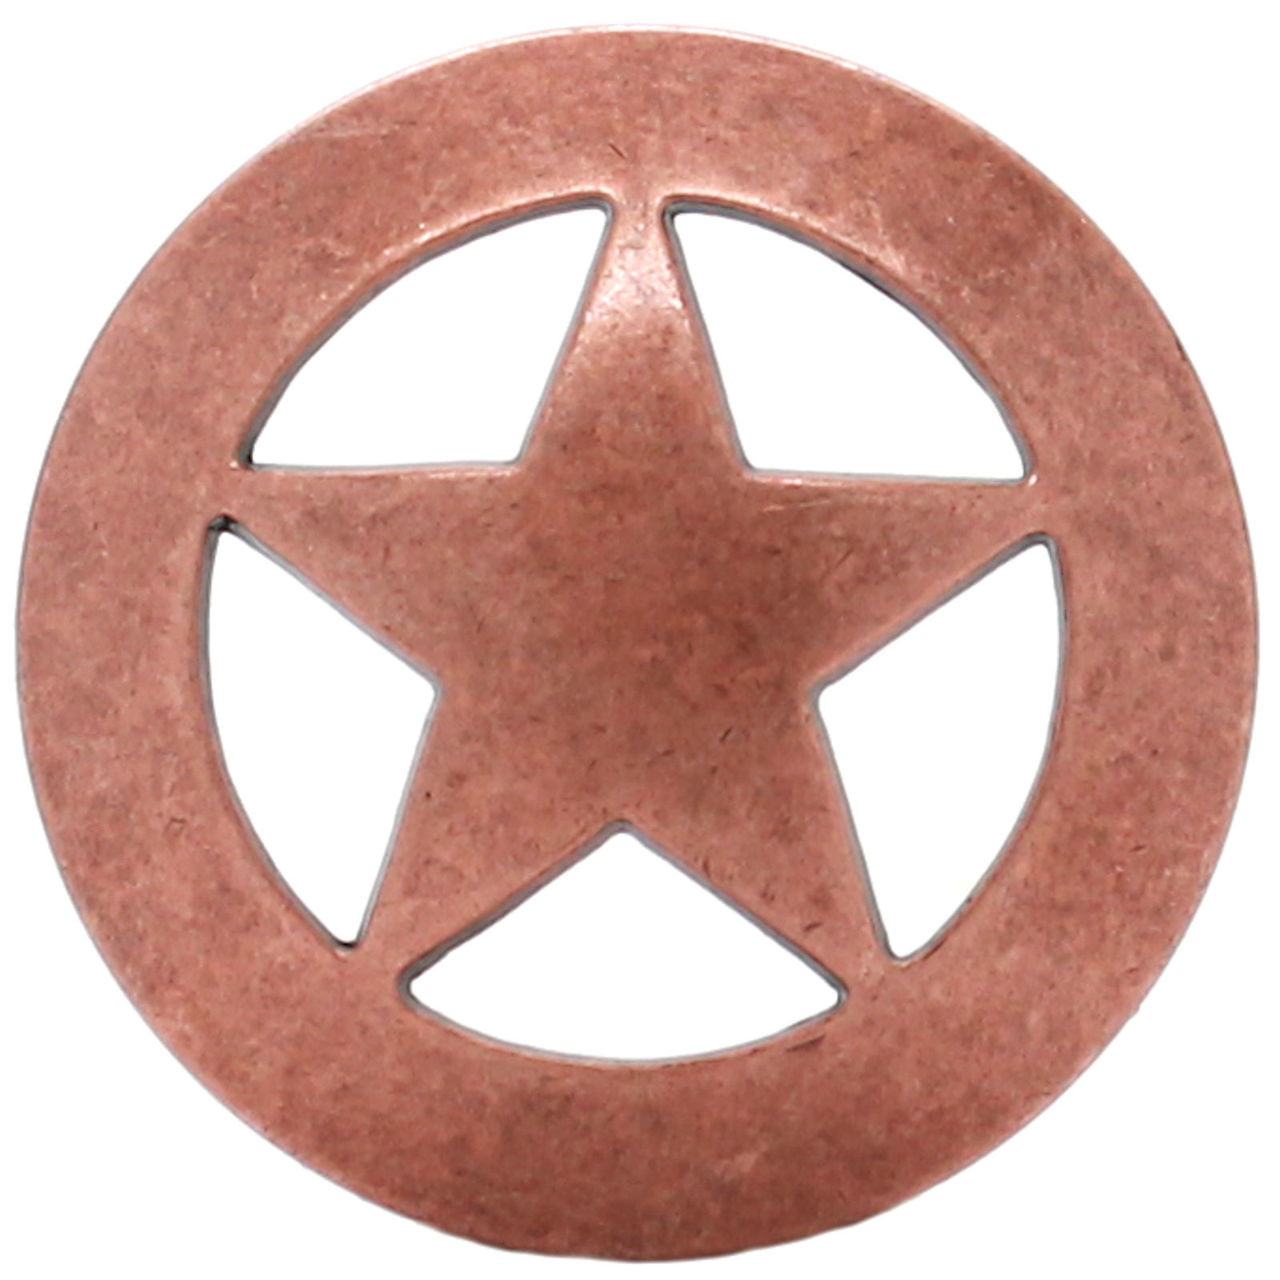 Smooth Star Screw Back Concho Copper 1-3/4" 7533-10 by Stecksstore